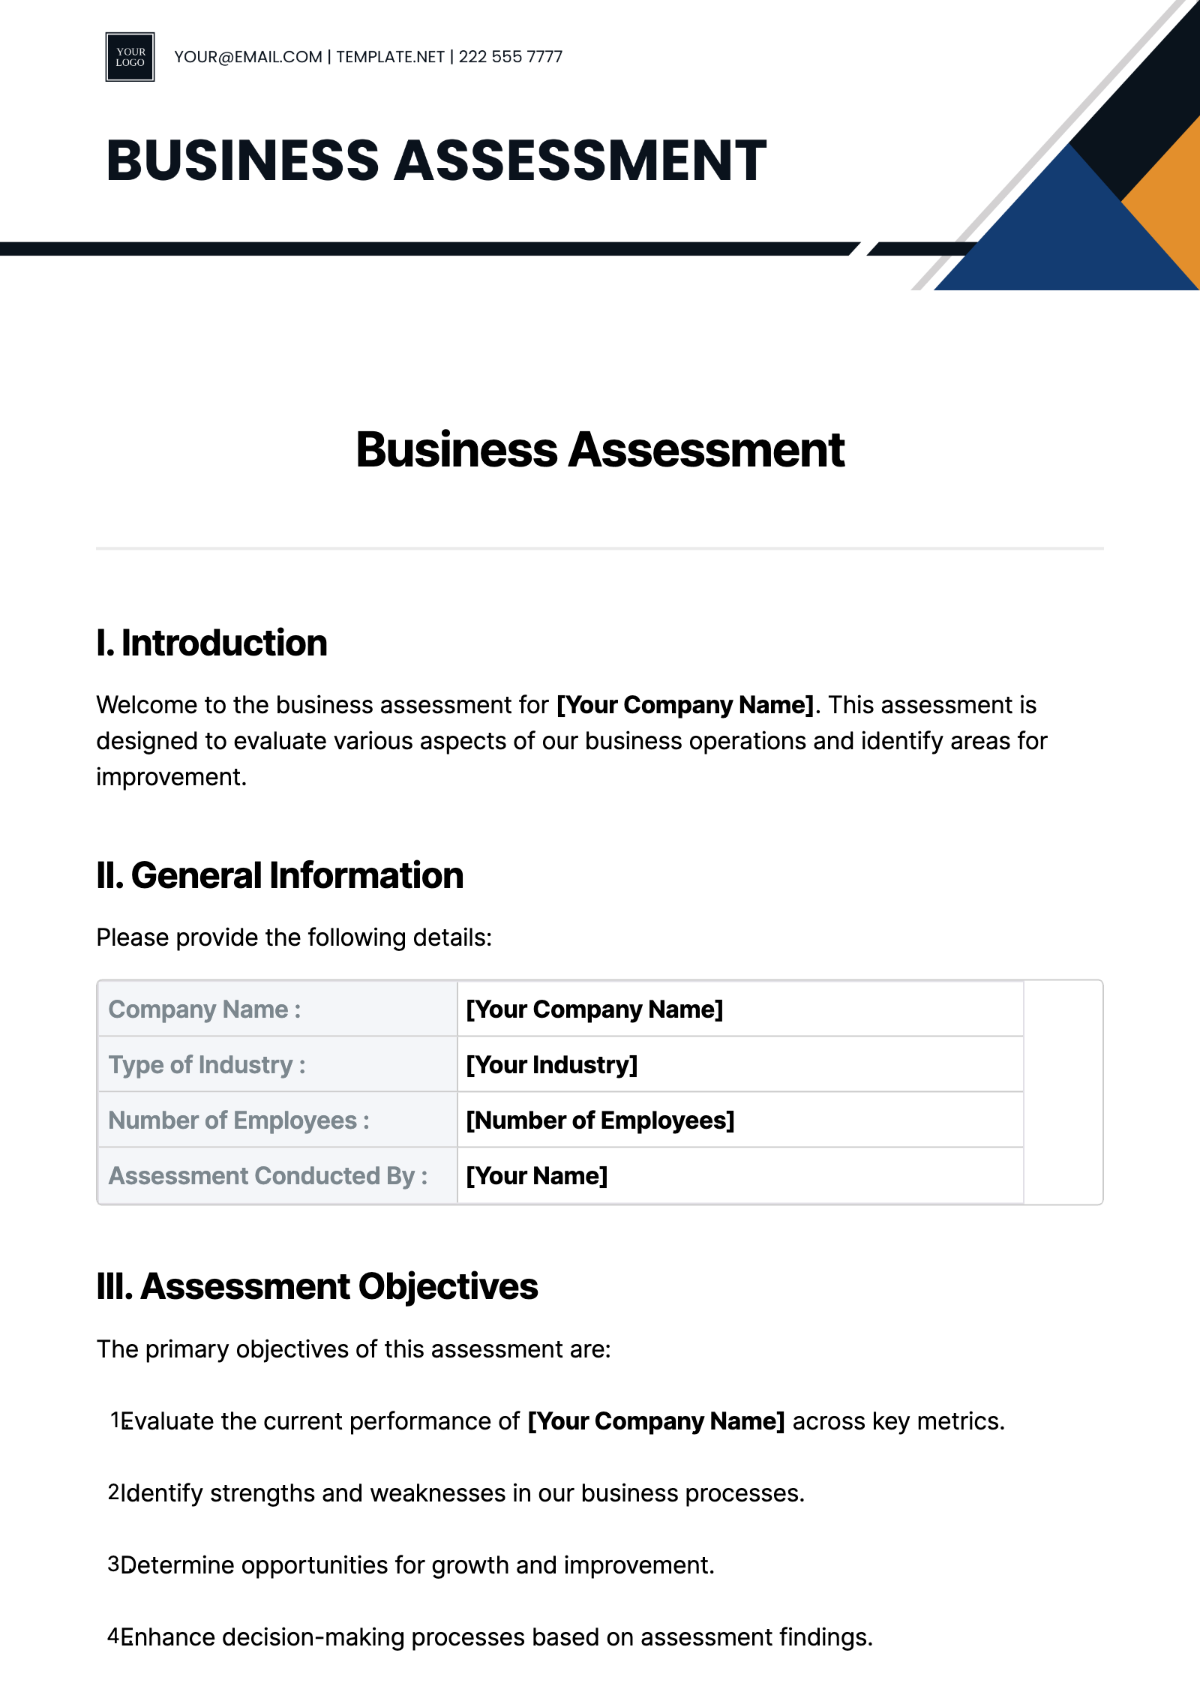 Free Business Assessment Template